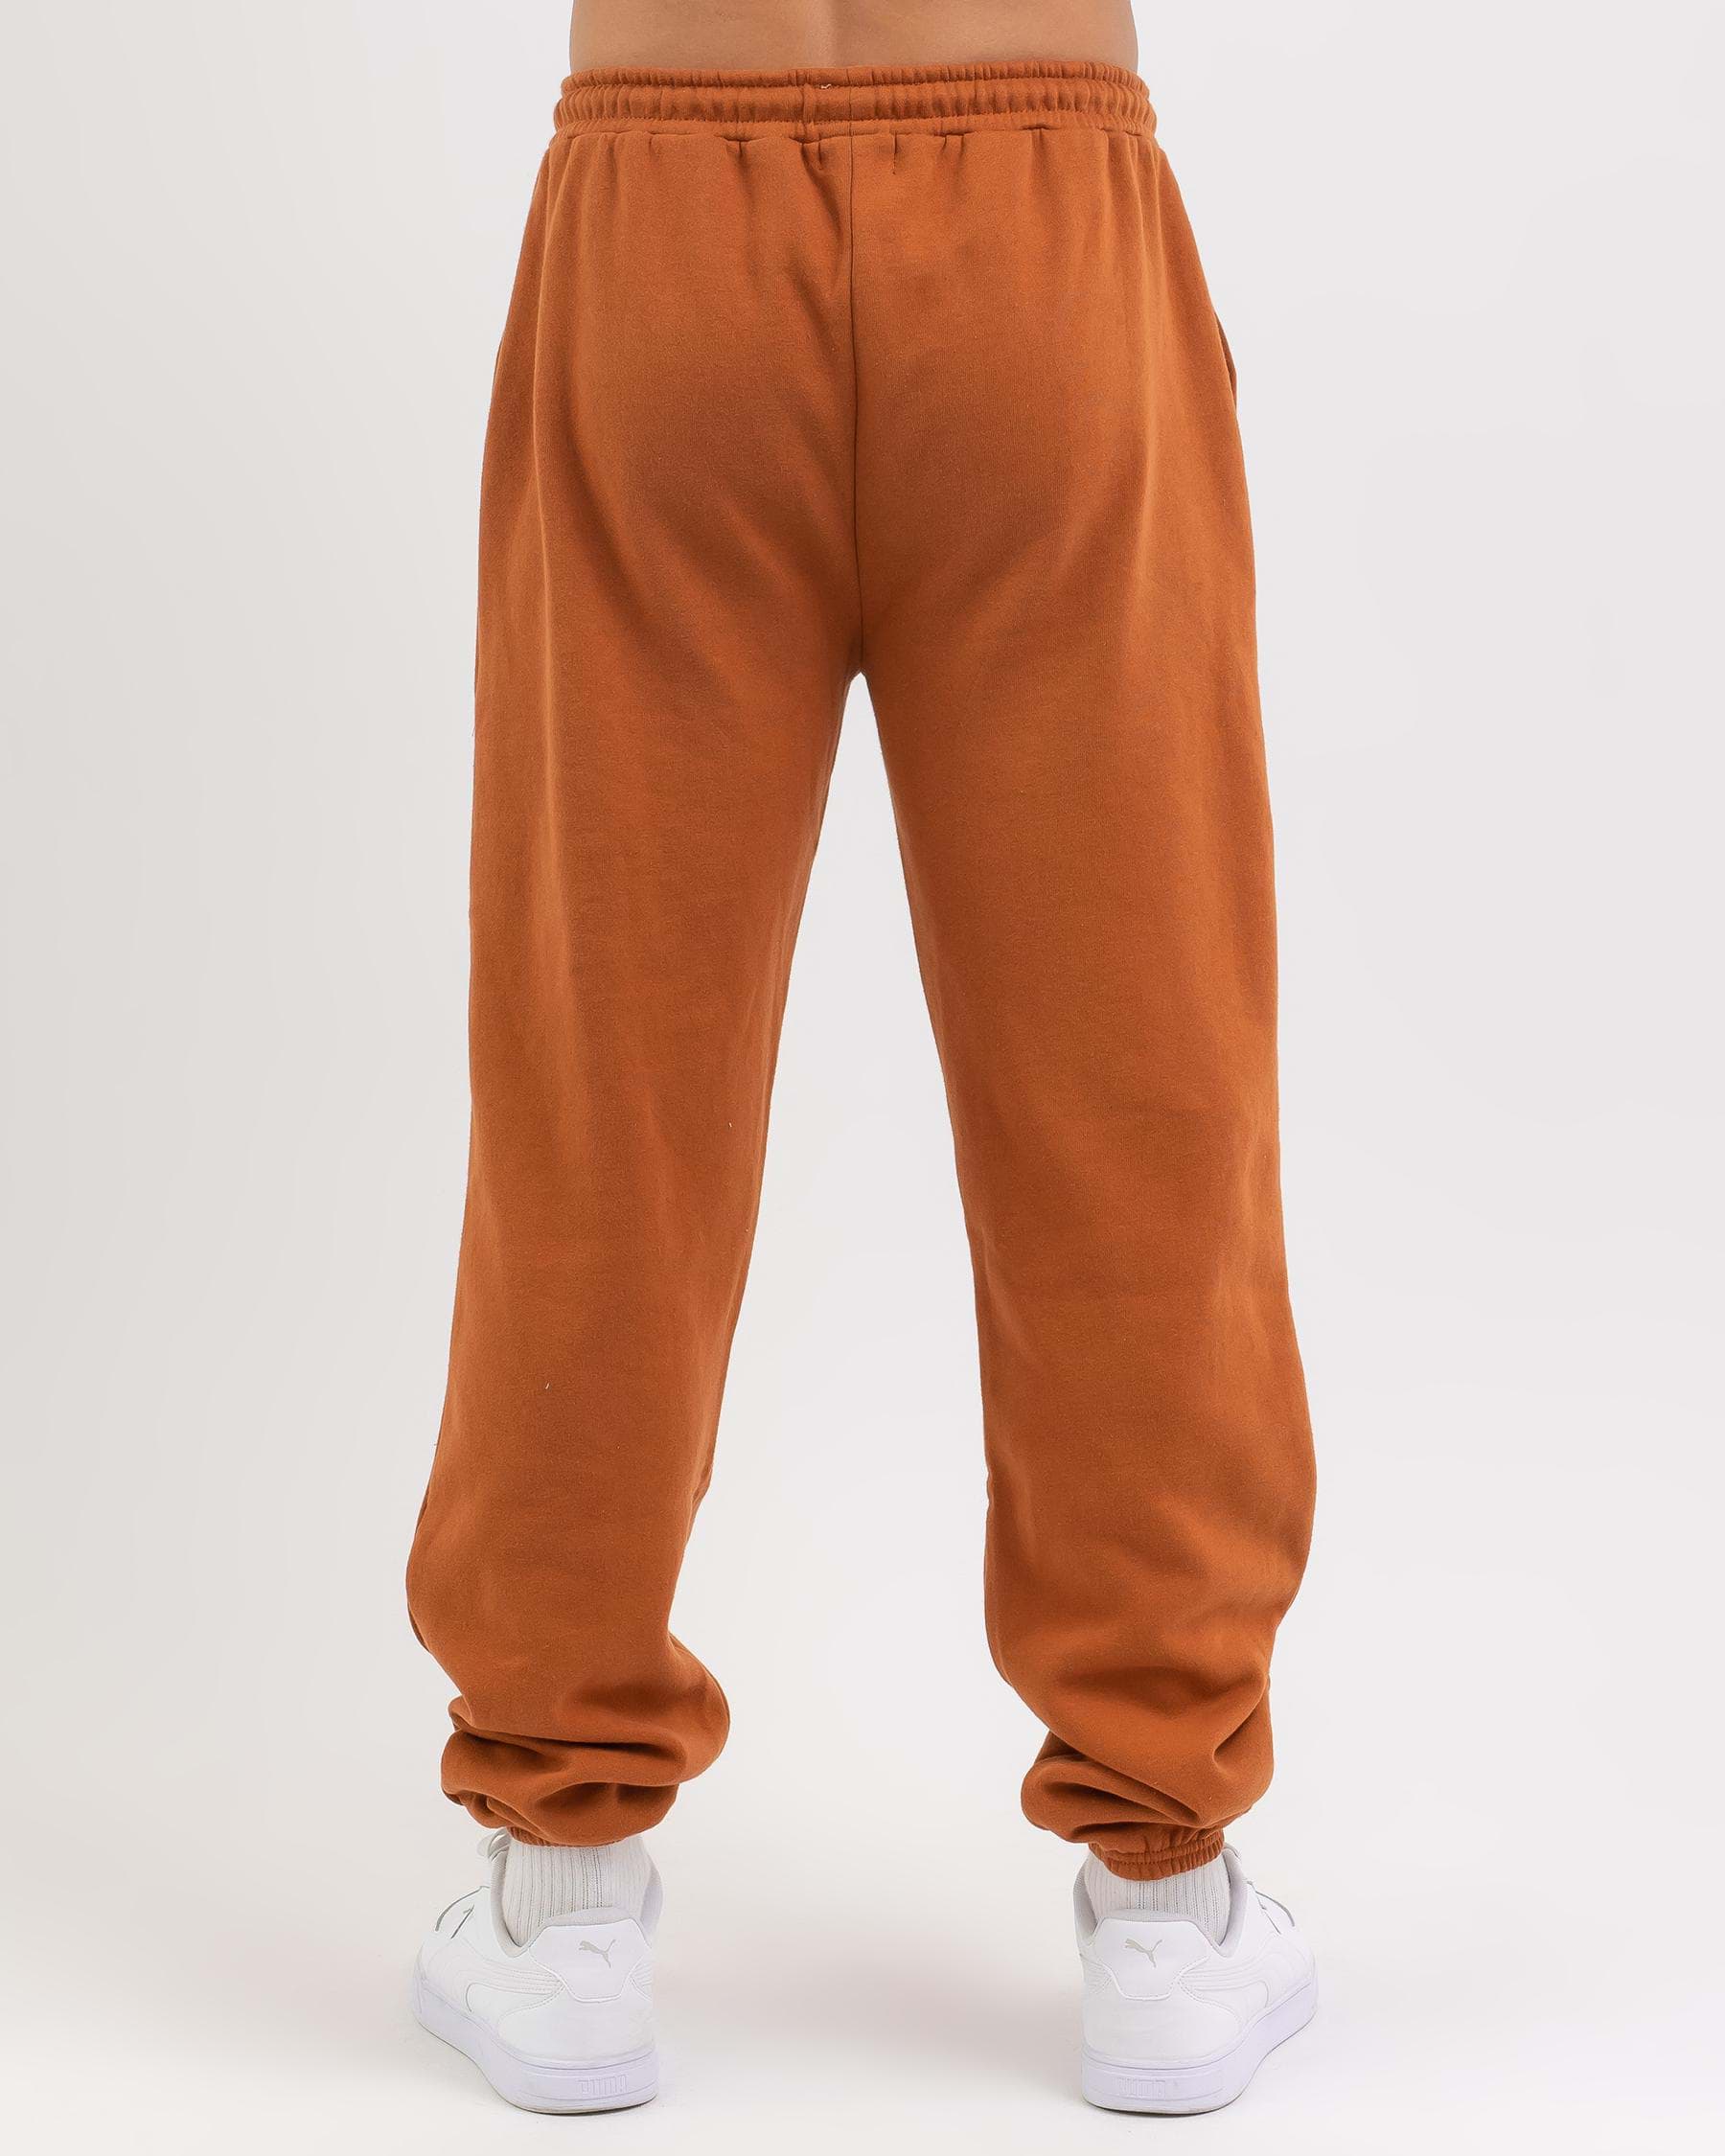 Brixton Alton Track Pants In Caramel - Fast Shipping & Easy Returns ...